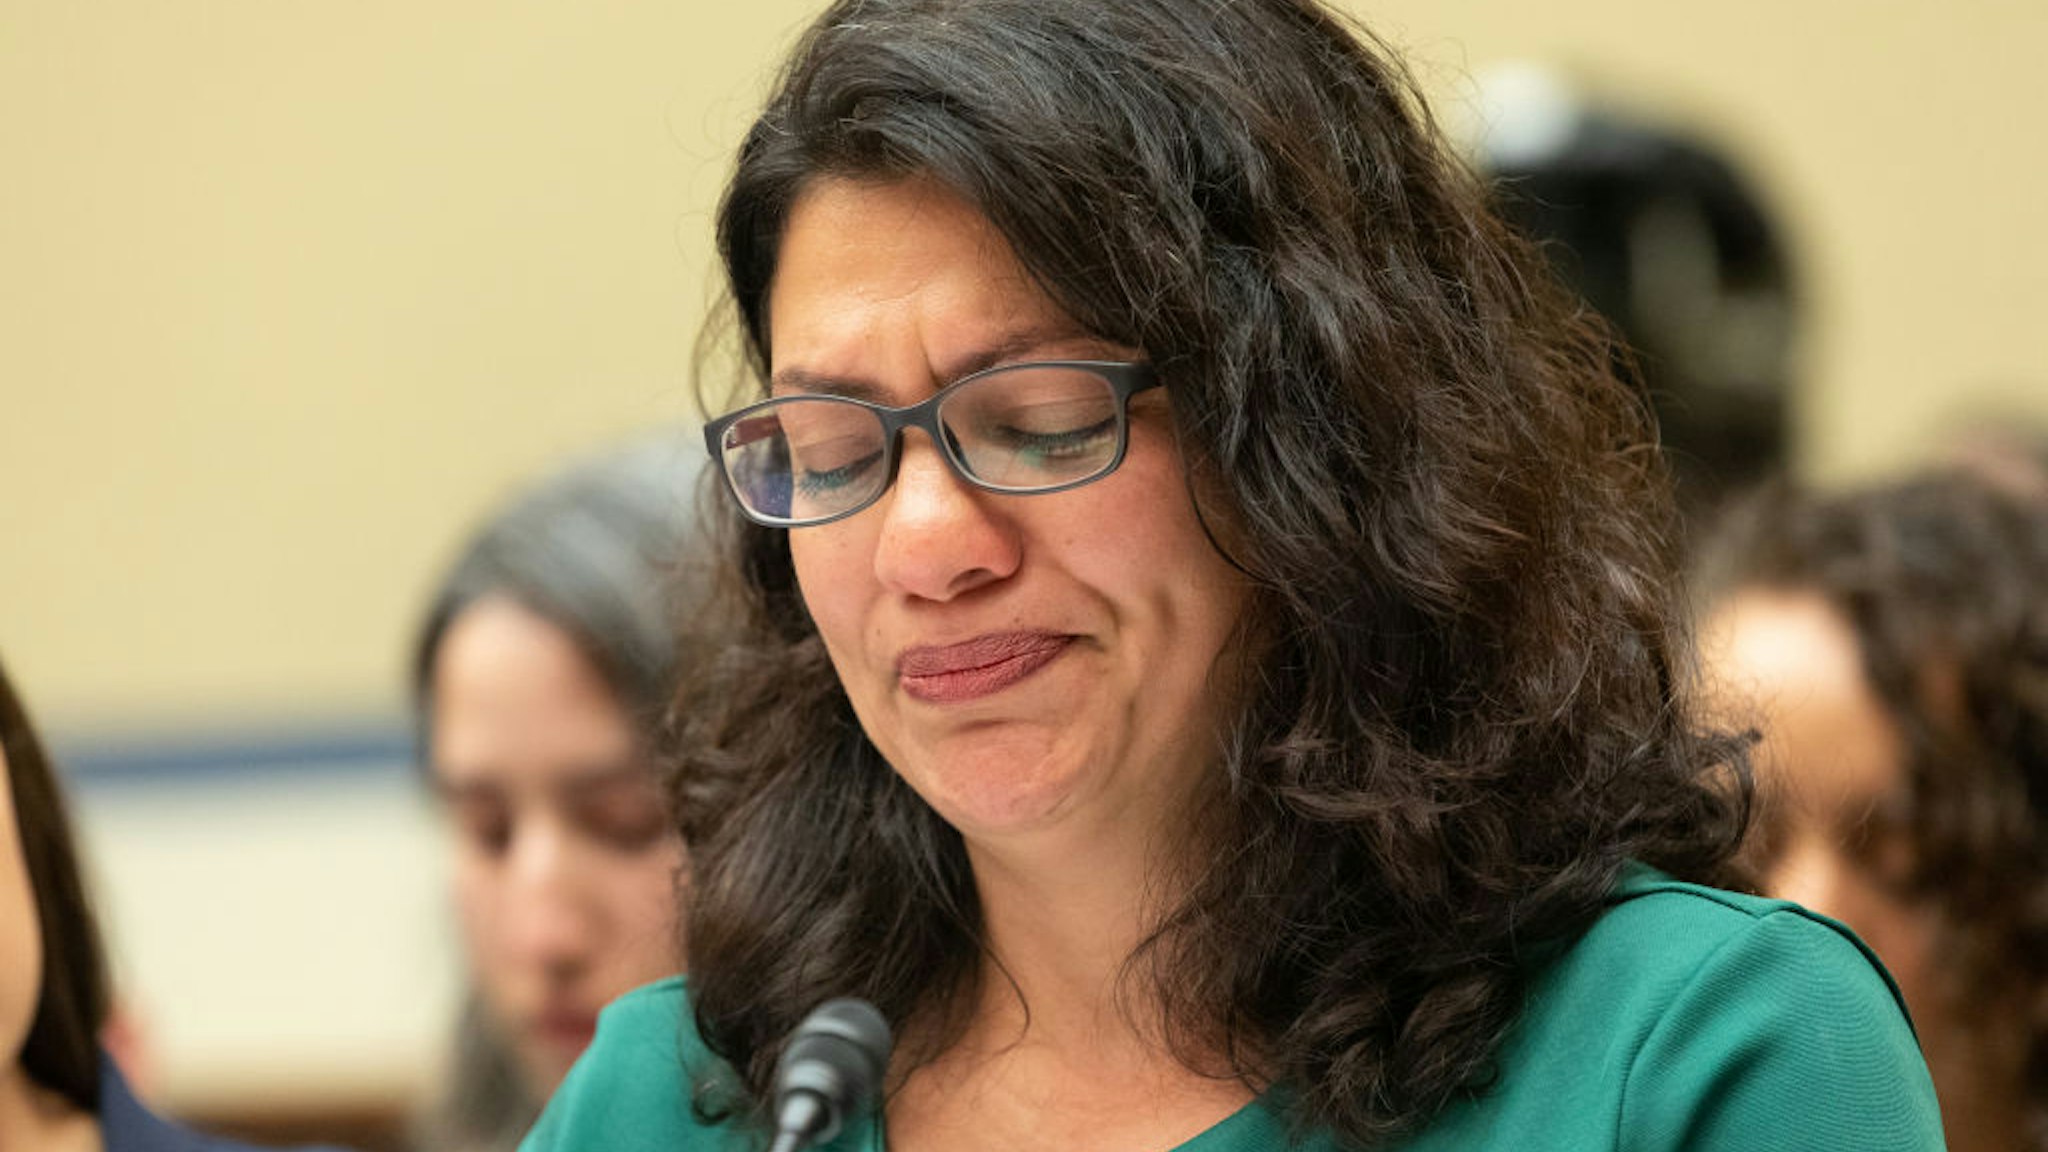 Rashida Tlaib teared up during a House Oversight and Reform Committee hearing